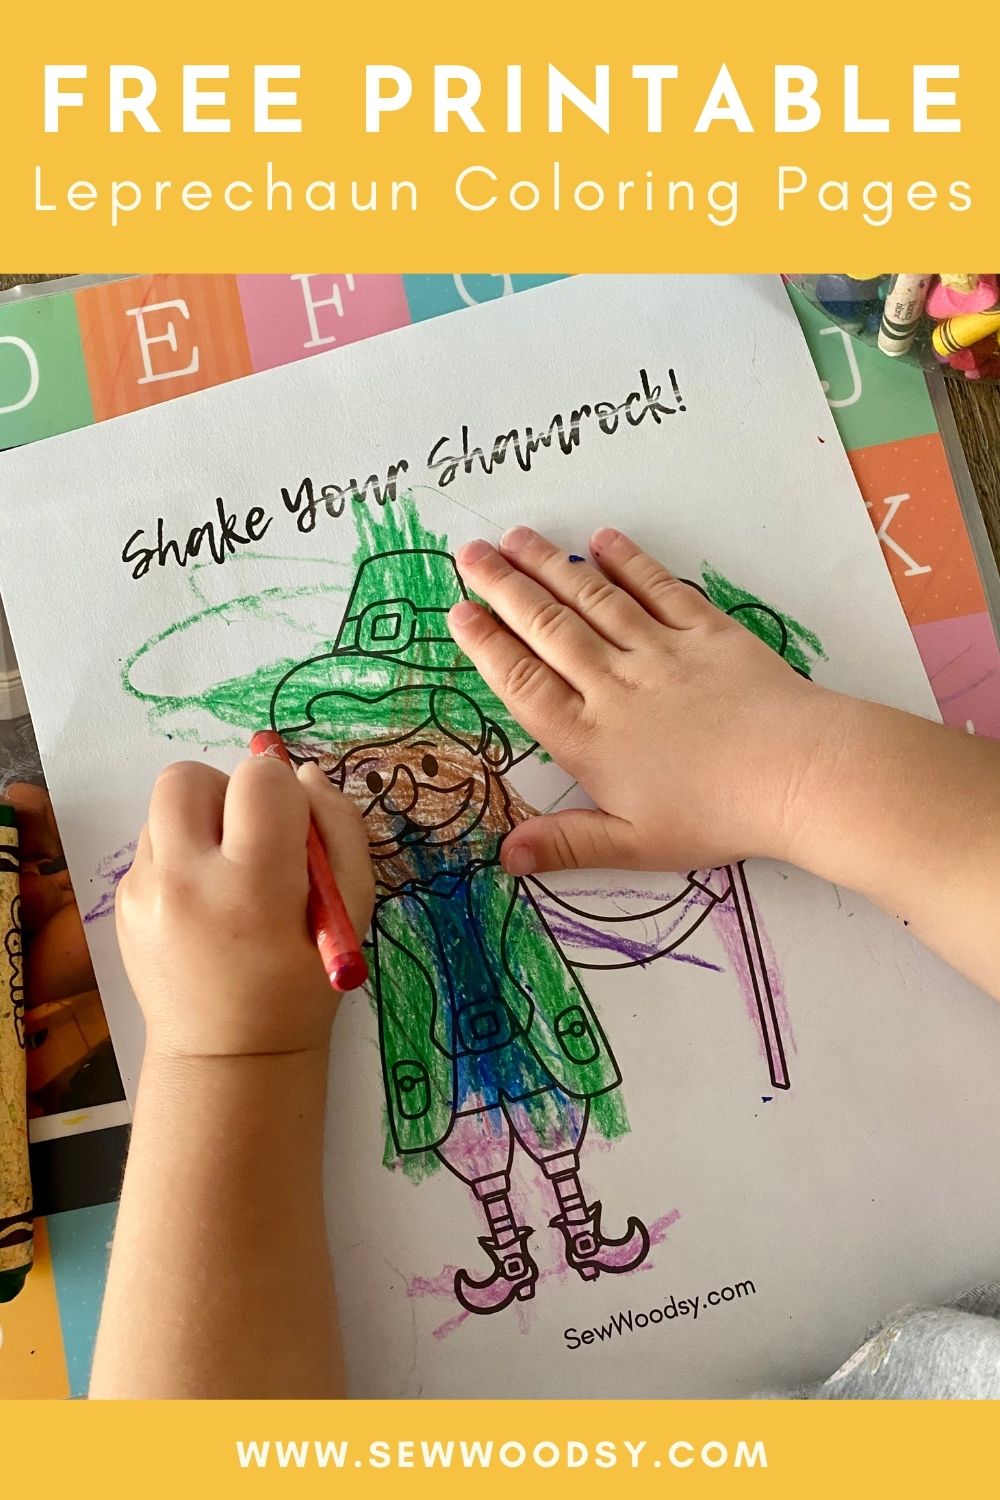 Child coloring a leprechaun with text on image for pinterest.